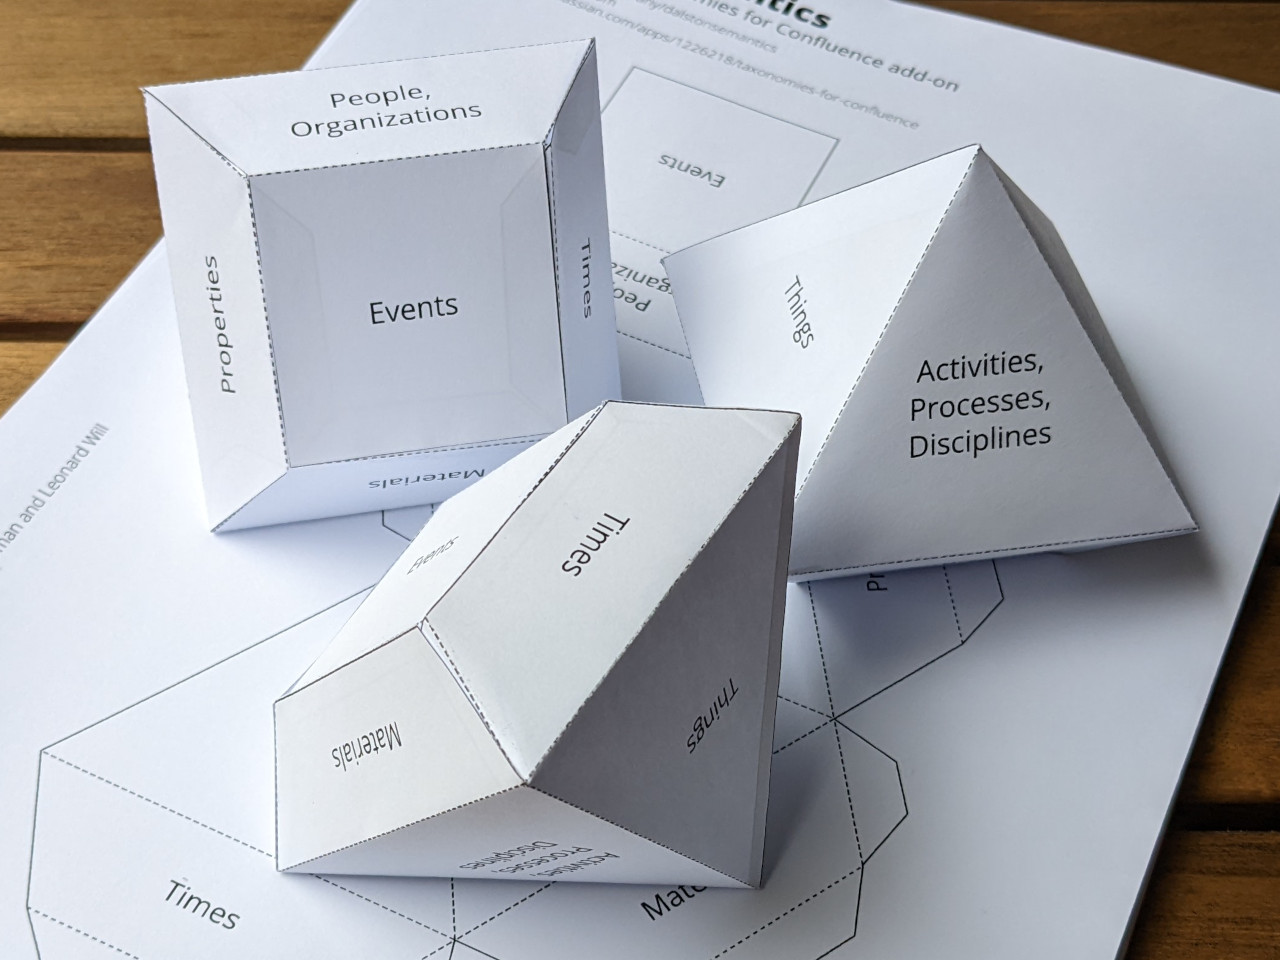 Outline of the foldable 3D shape to help communicate faceted classification ideas.